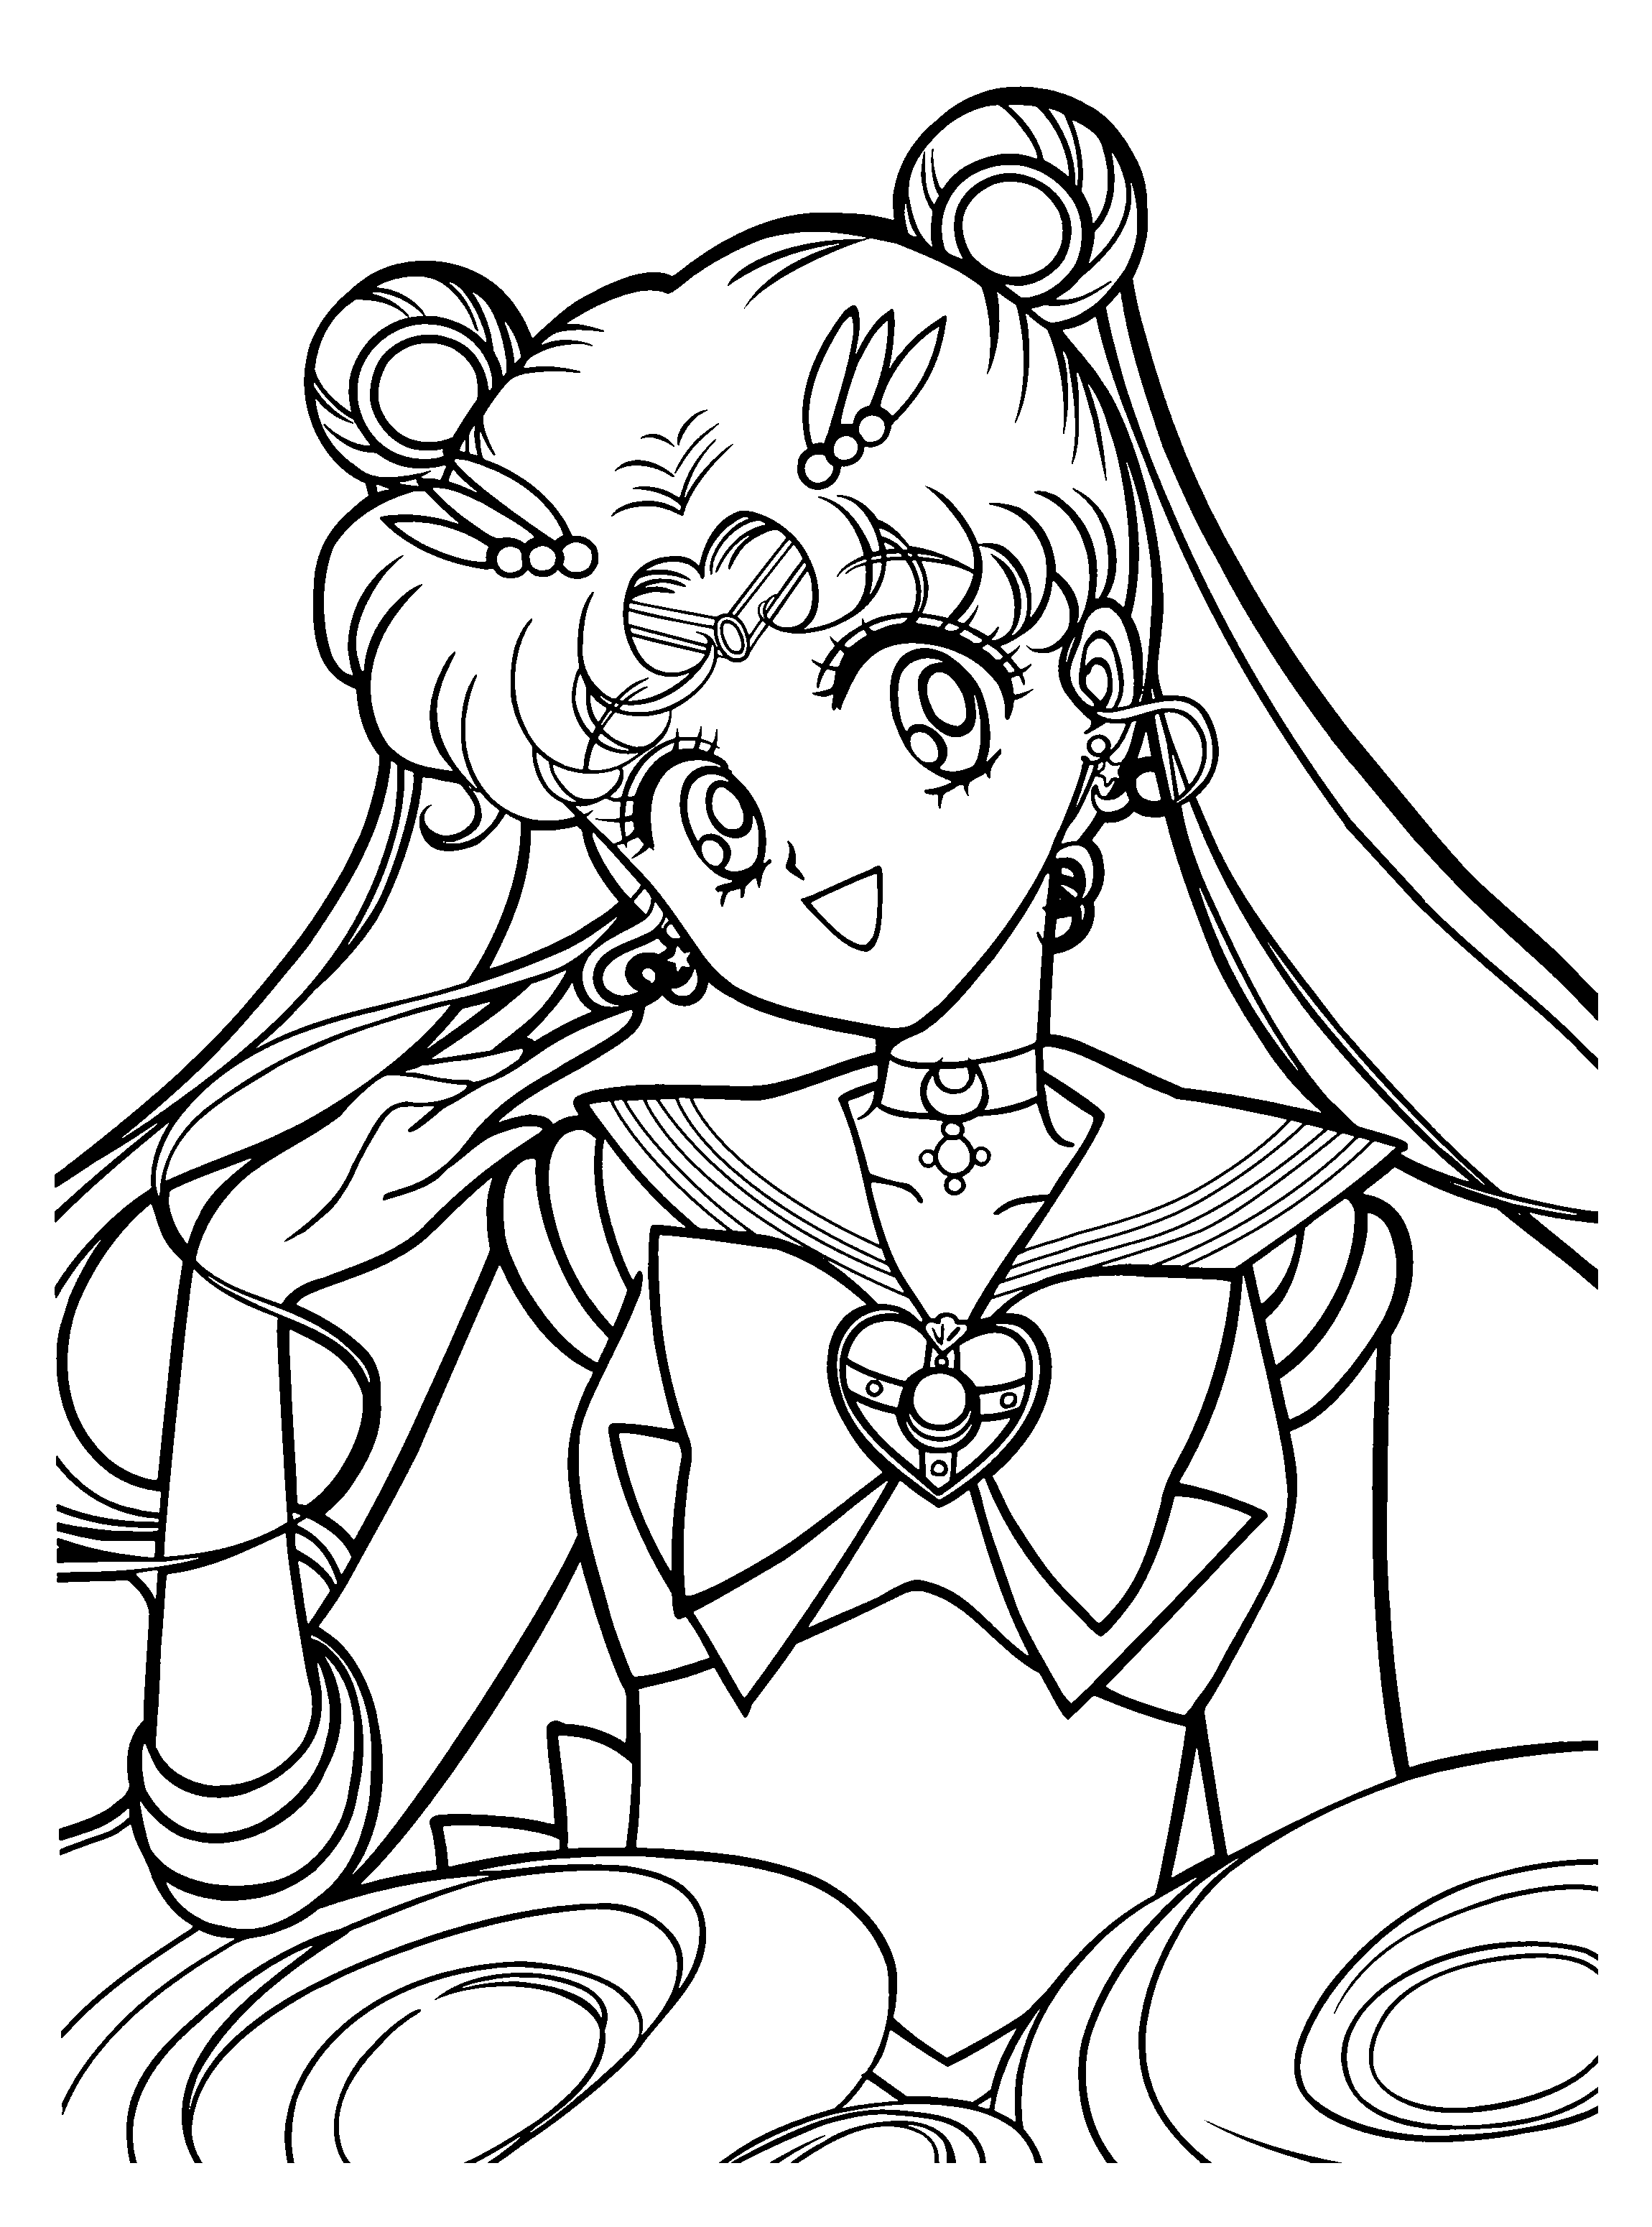 animated-coloring-pages-sailor-moon-image-0088